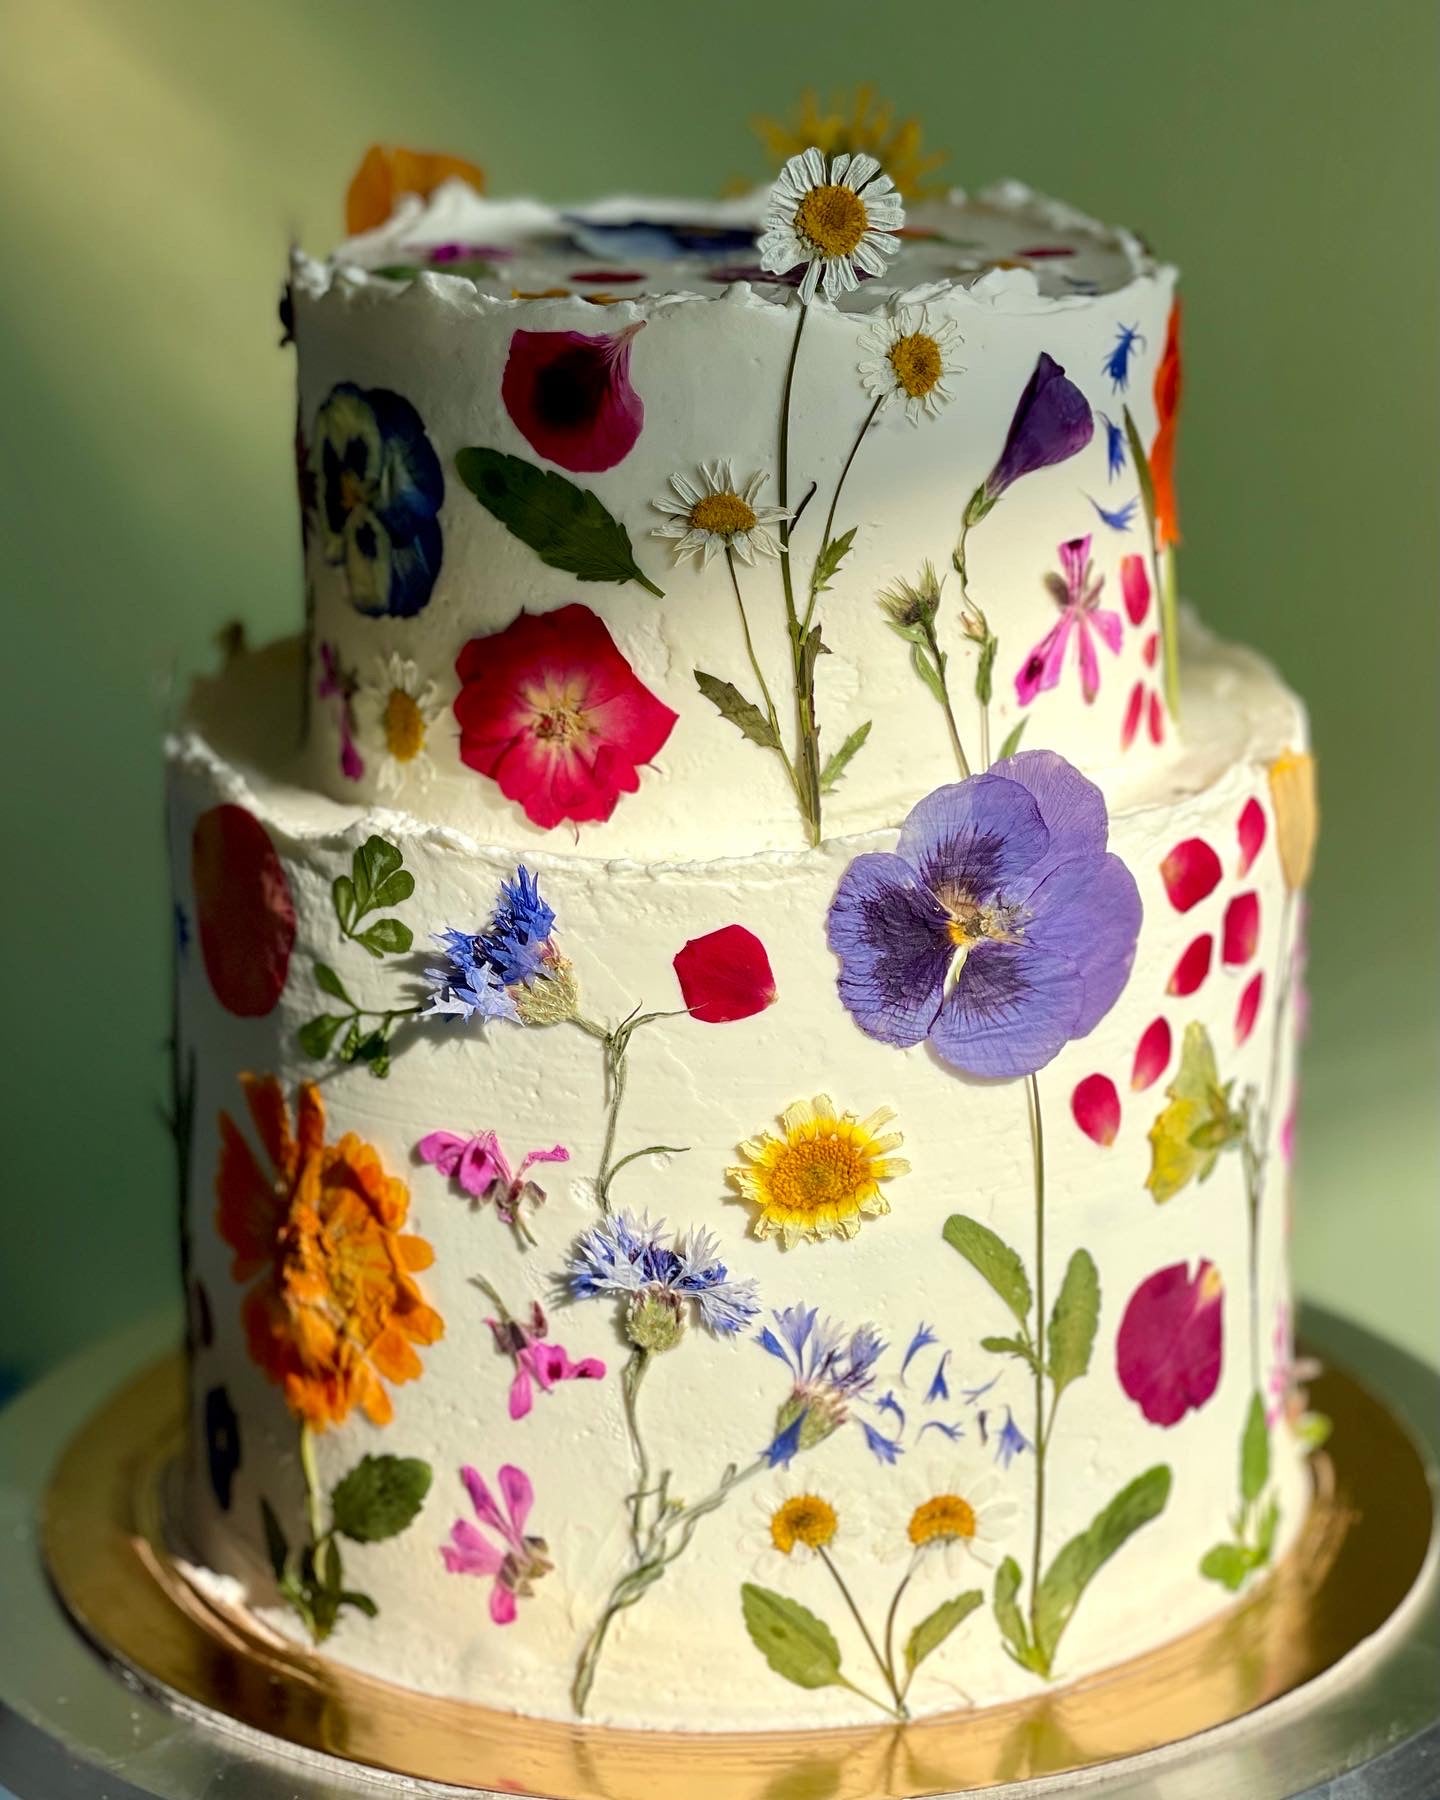 Pressed Flowers and Cake Decorating - My Cake School